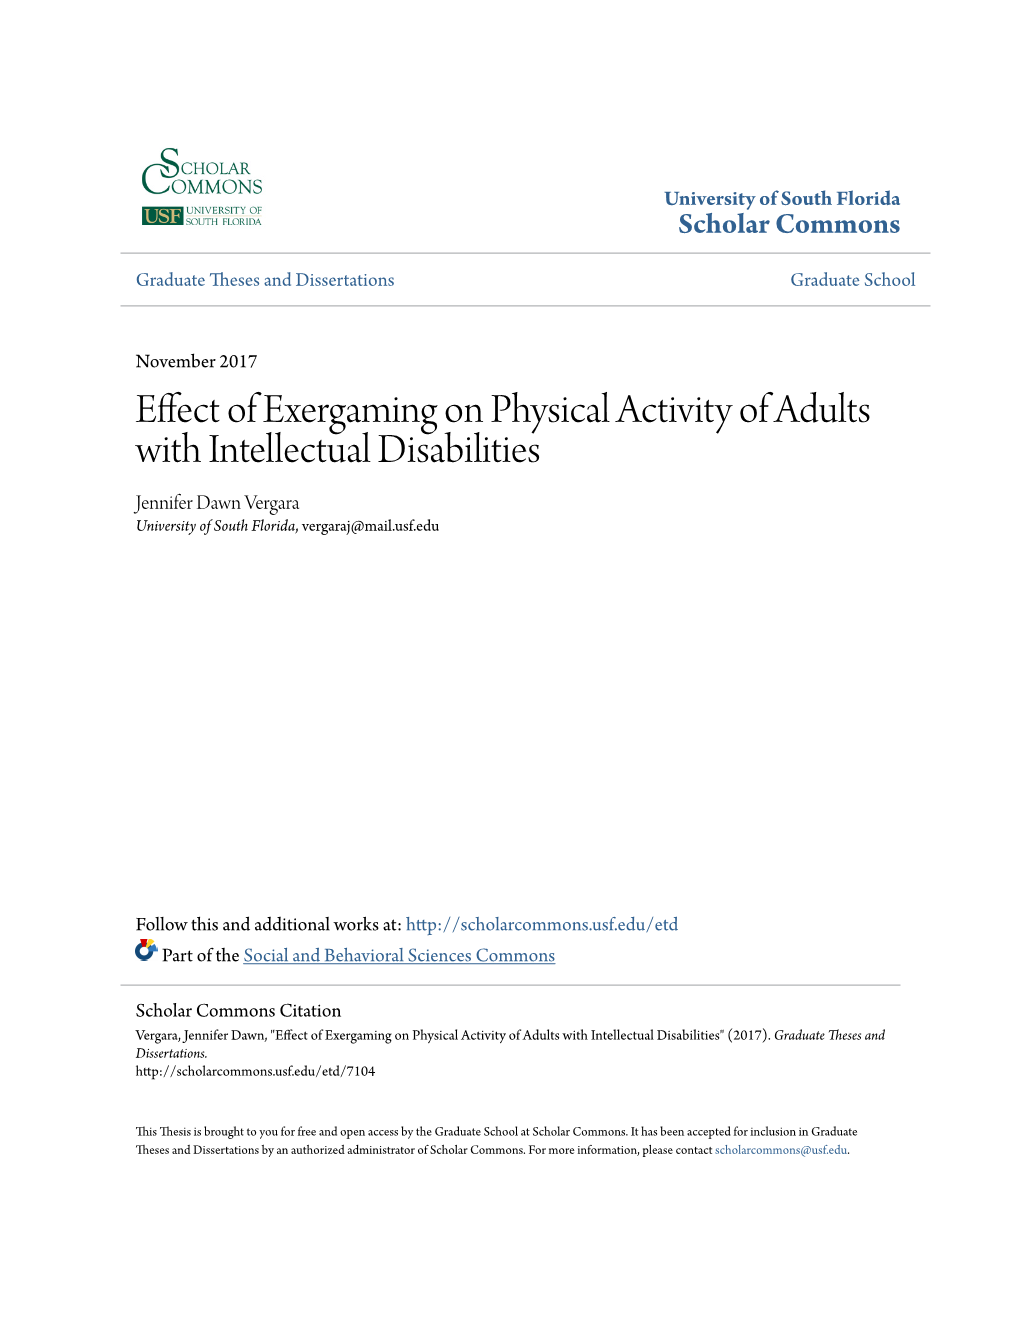 Effect of Exergaming on Physical Activity of Adults with Intellectual Disabilities Jennifer Dawn Vergara University of South Florida, Vergaraj@Mail.Usf.Edu